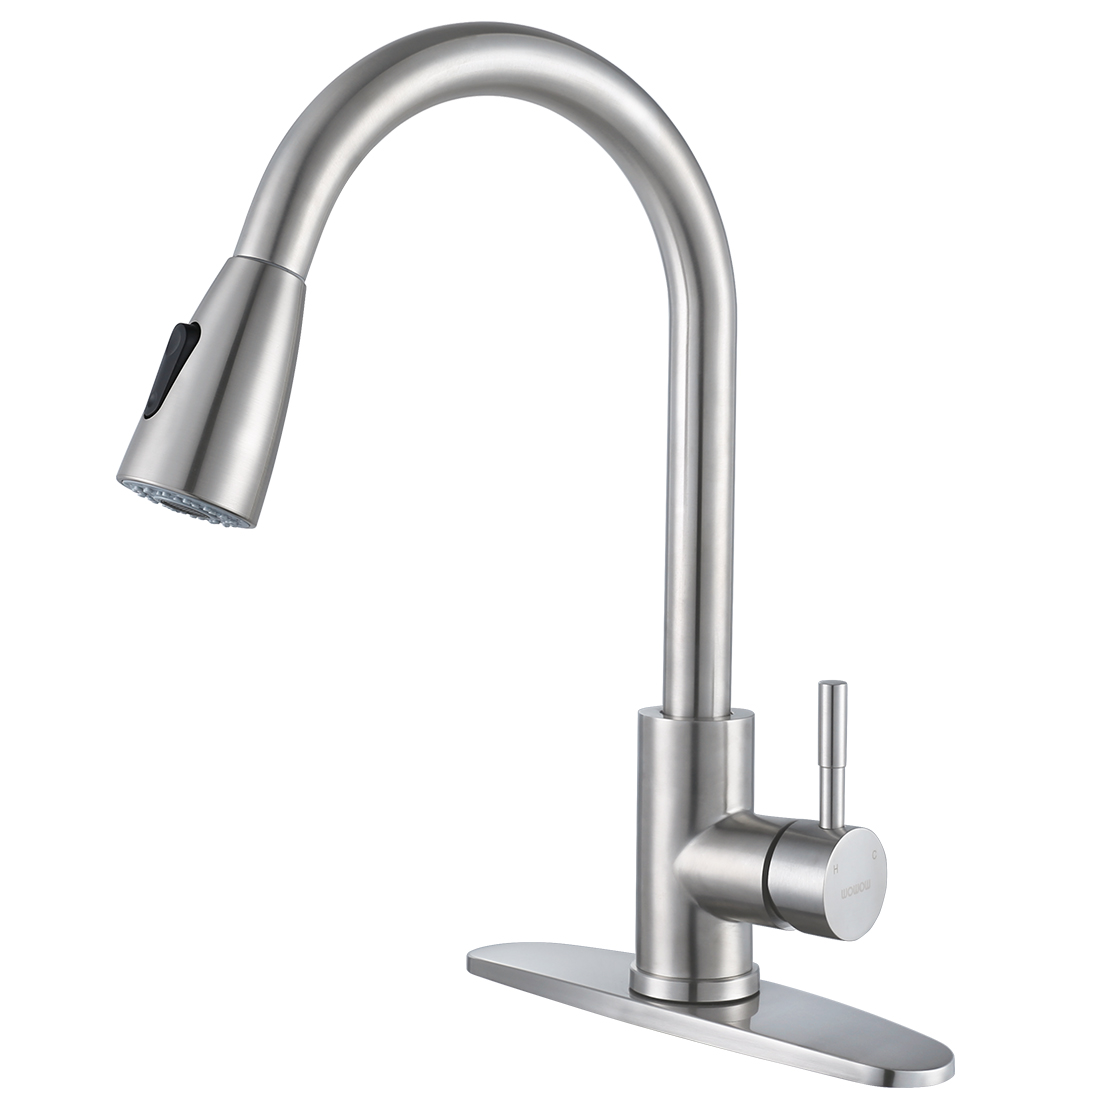 iVIGA 360 Degree Swivel Modern Brushed Nickel High Arc Kitchen Faucet with Pull Out Sprayer